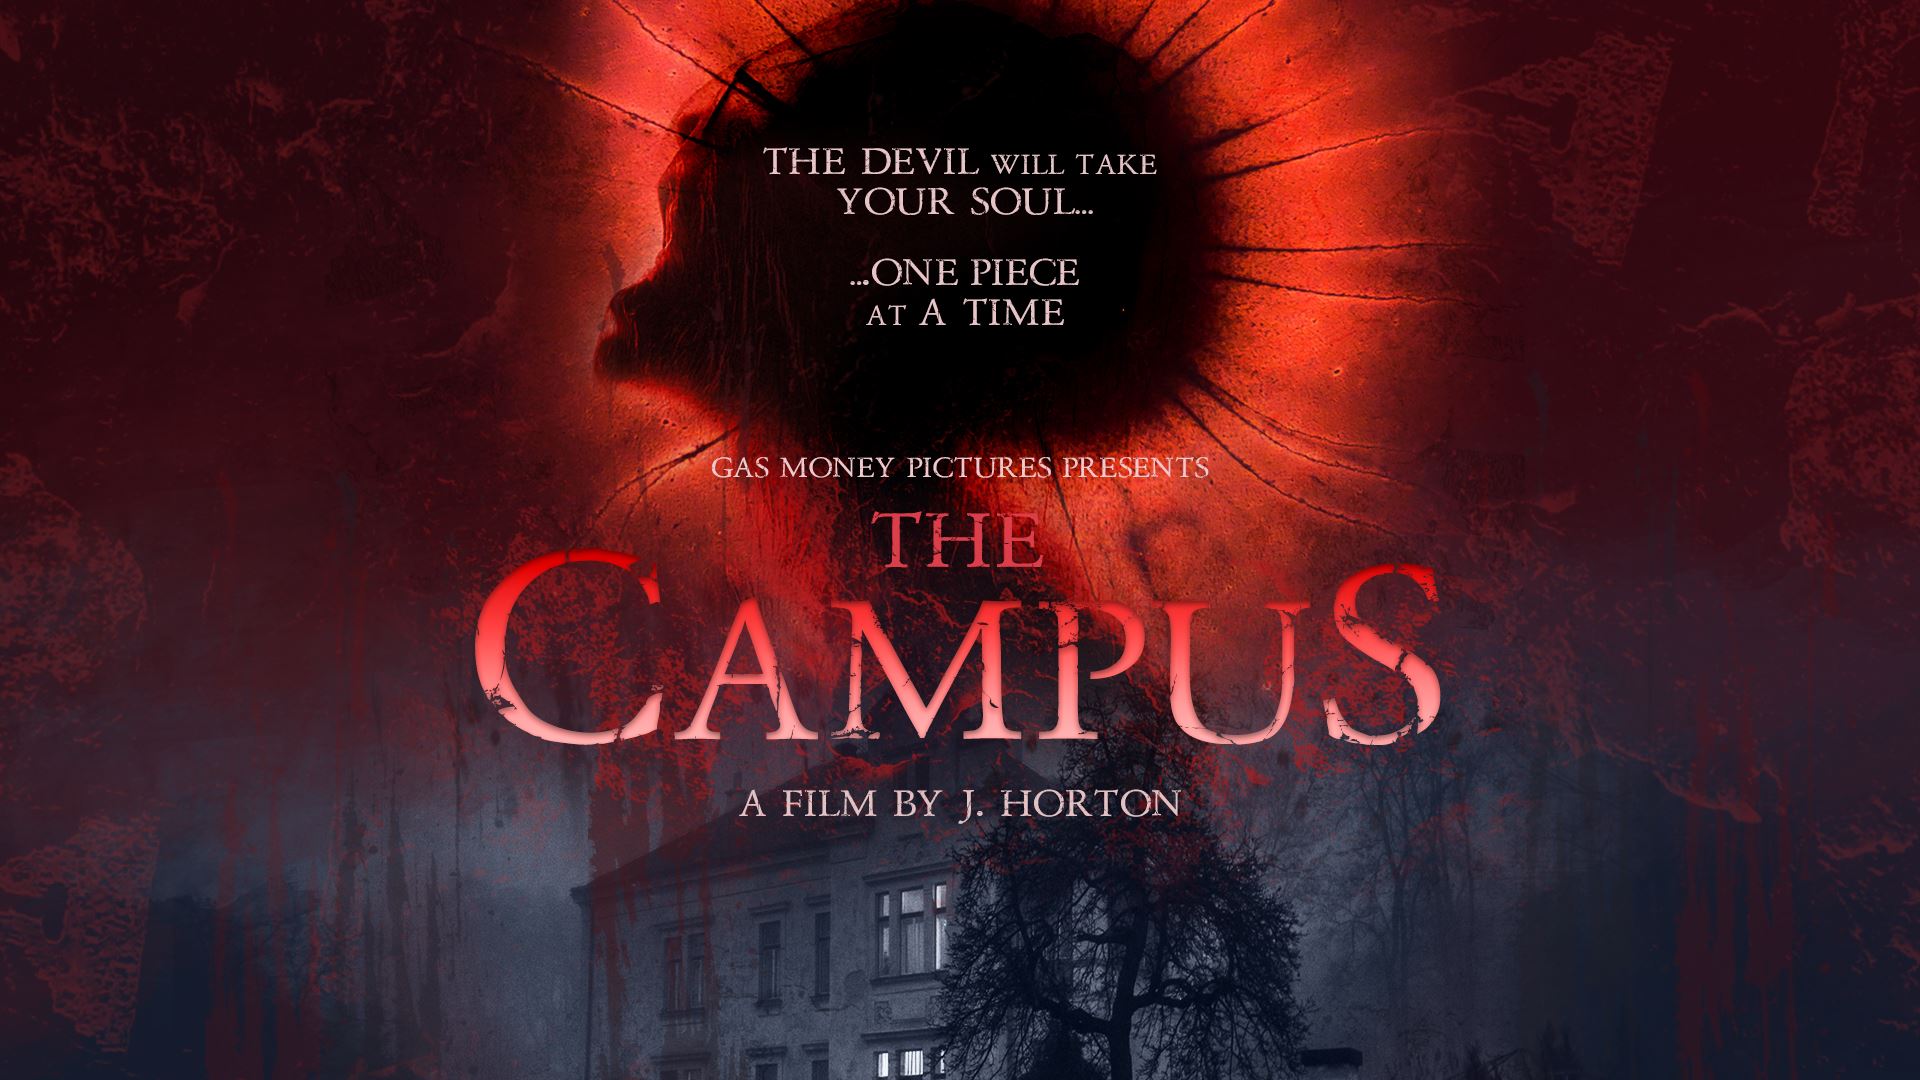 ‘The Campus’ Sets Sights on Hollywood This Month